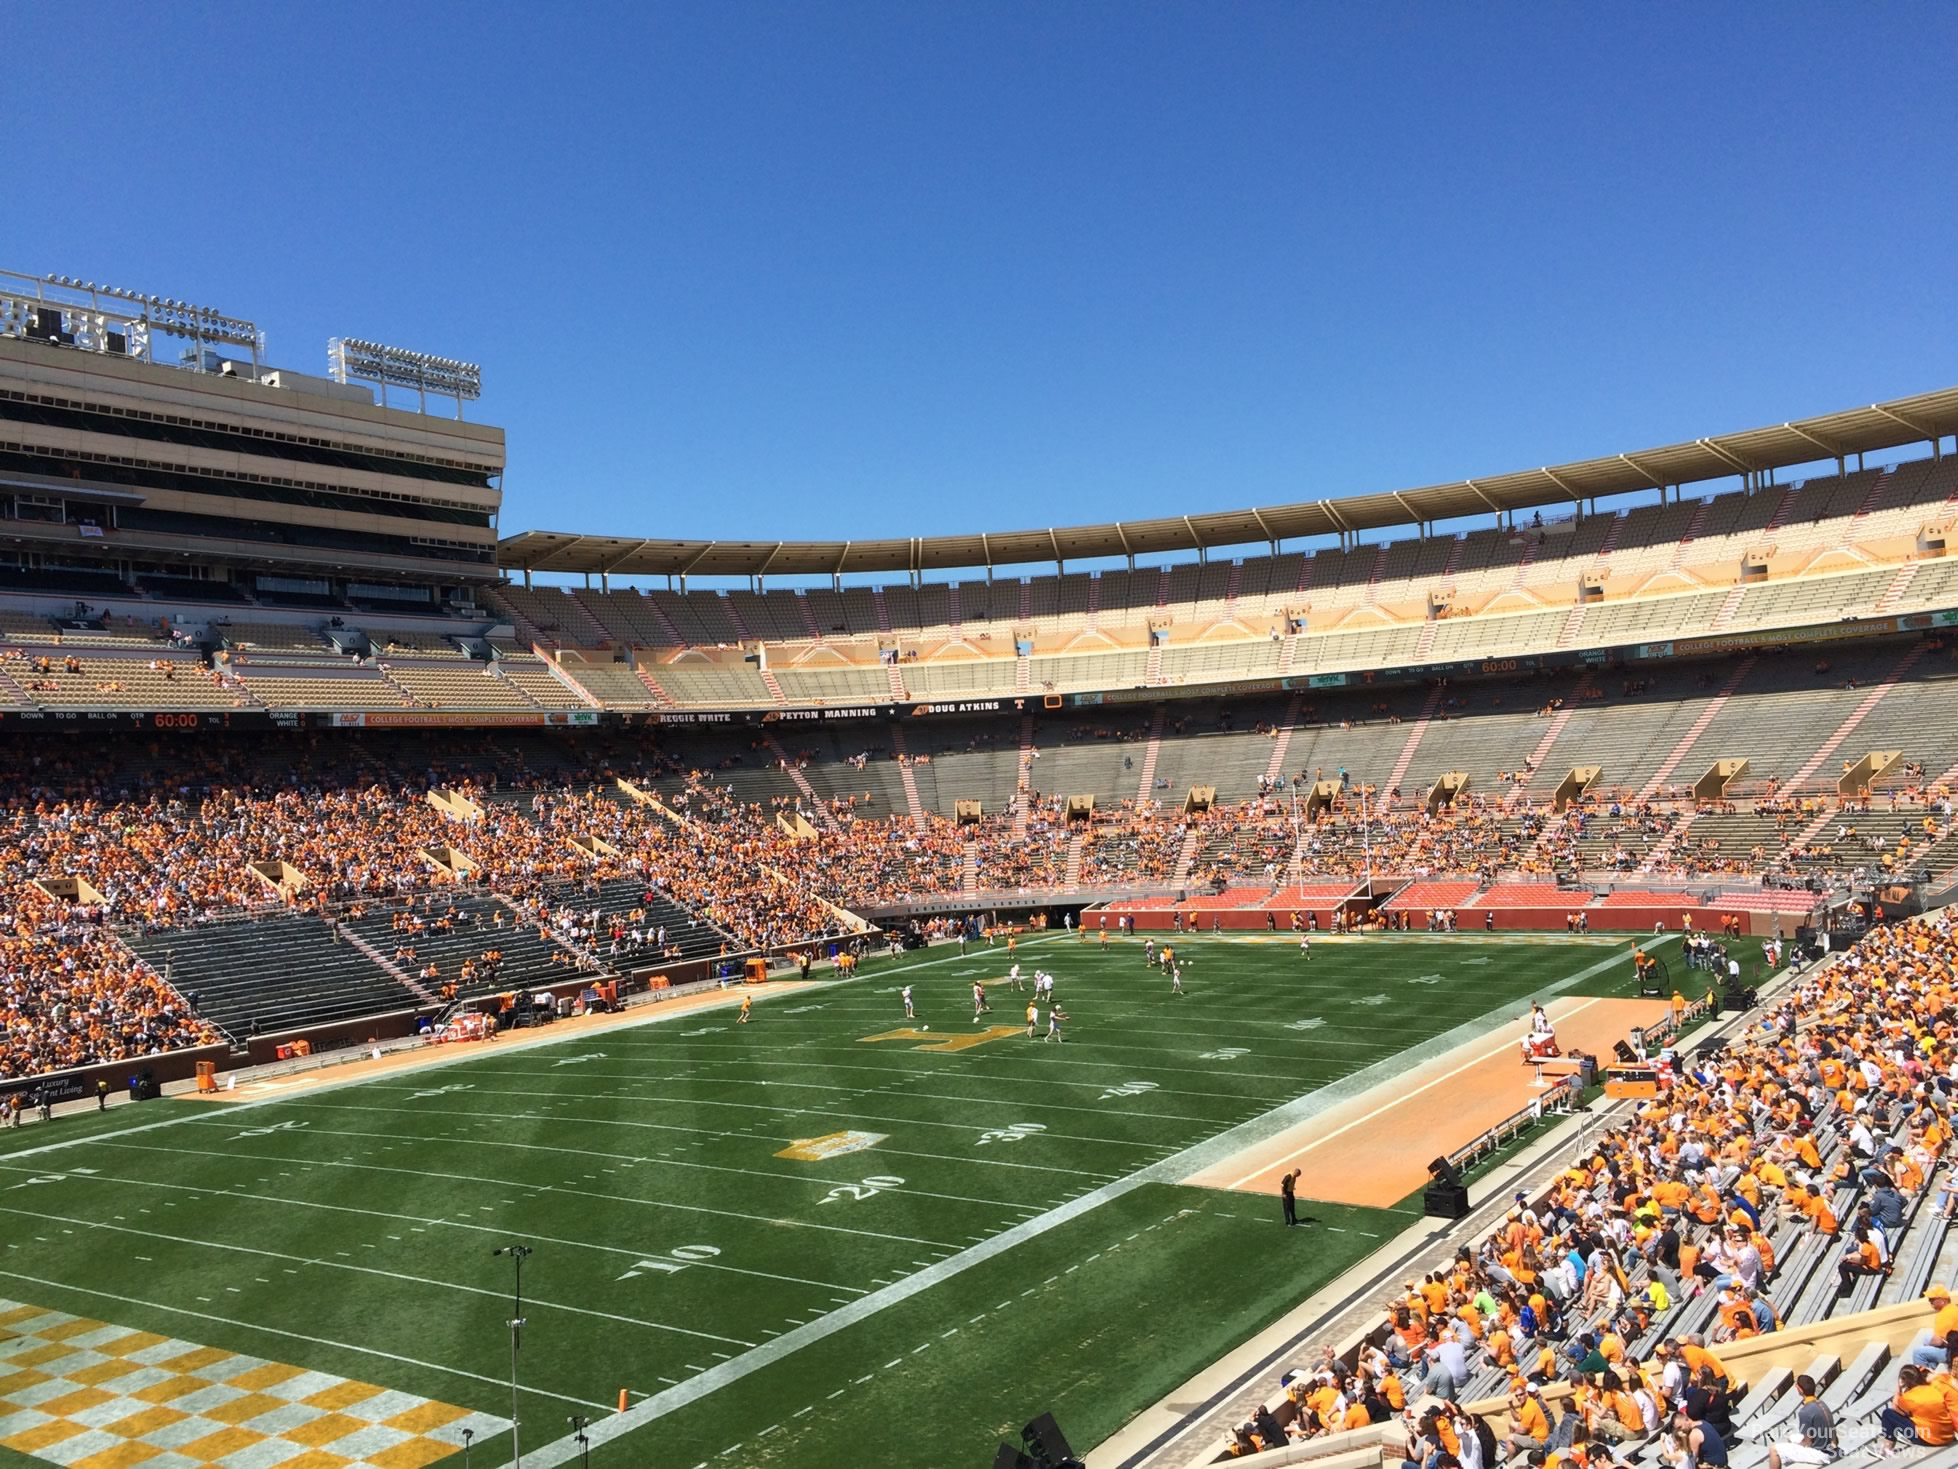 Neyland Seating Chart With Rows